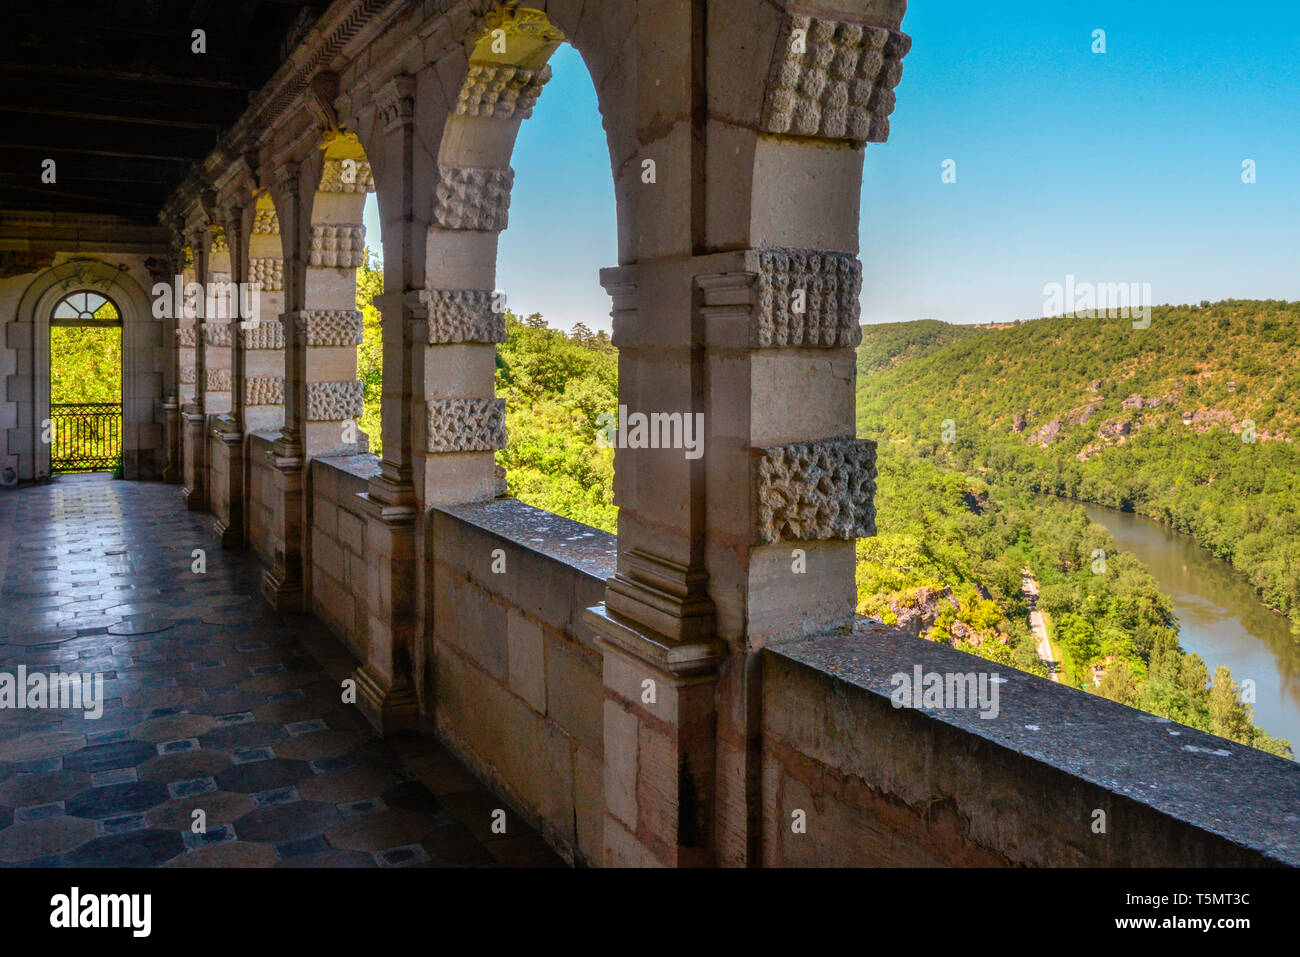 The Renaissance Gallery of the15th century castle at Bruniquel overlooking the river Aveyron in the Occitanie region of southern France. Stock Photo